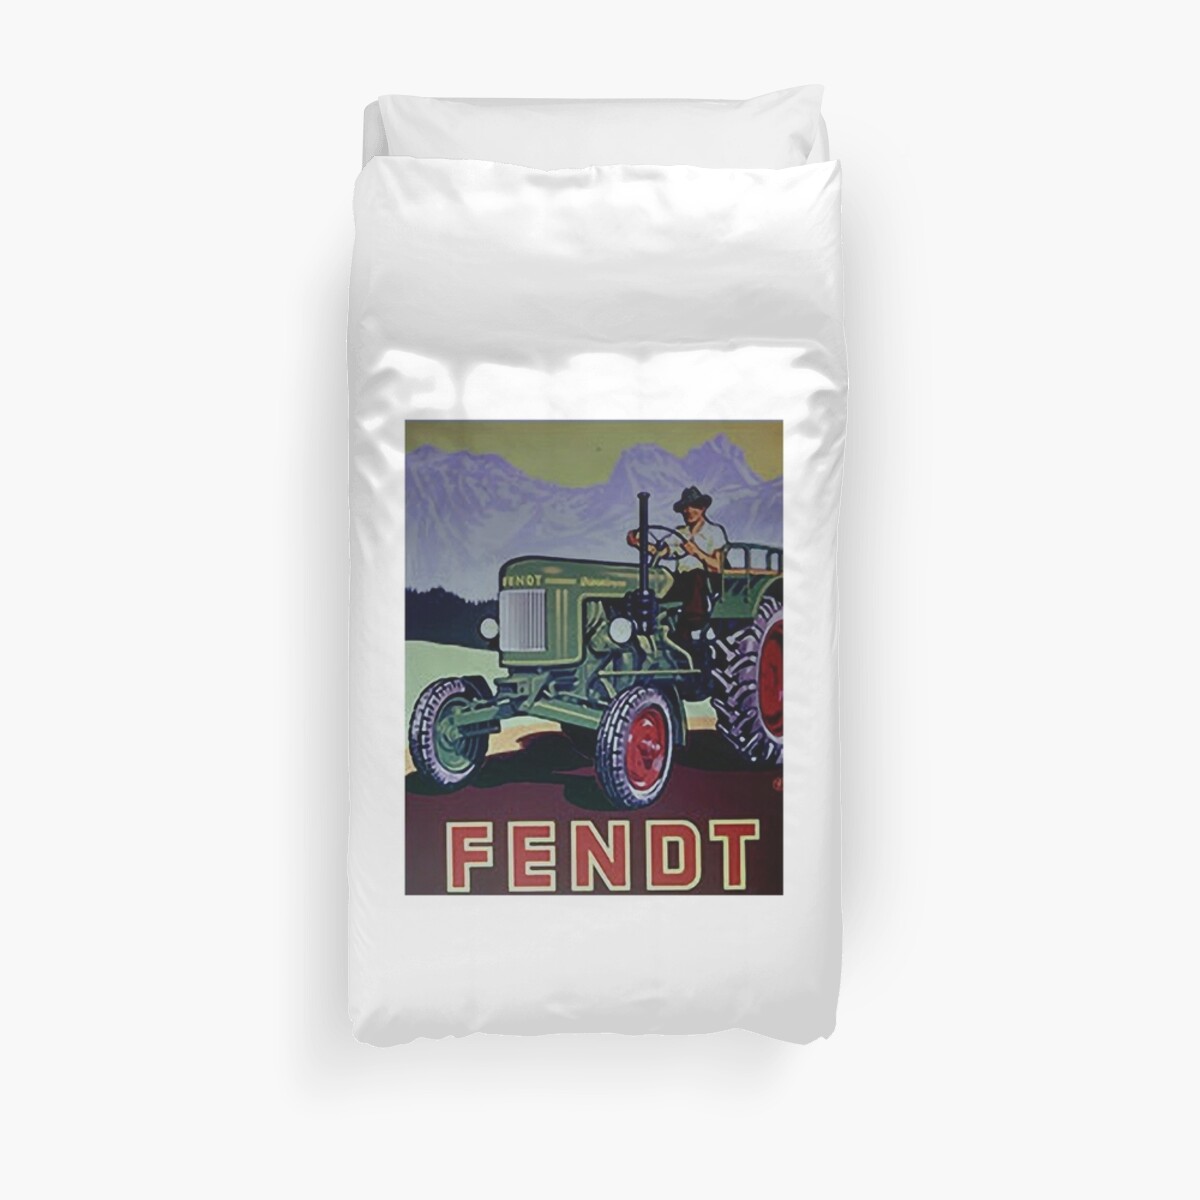 Vintage Fendt Farm Machinery Fendt Tractor Duvet Cover By Glyn123